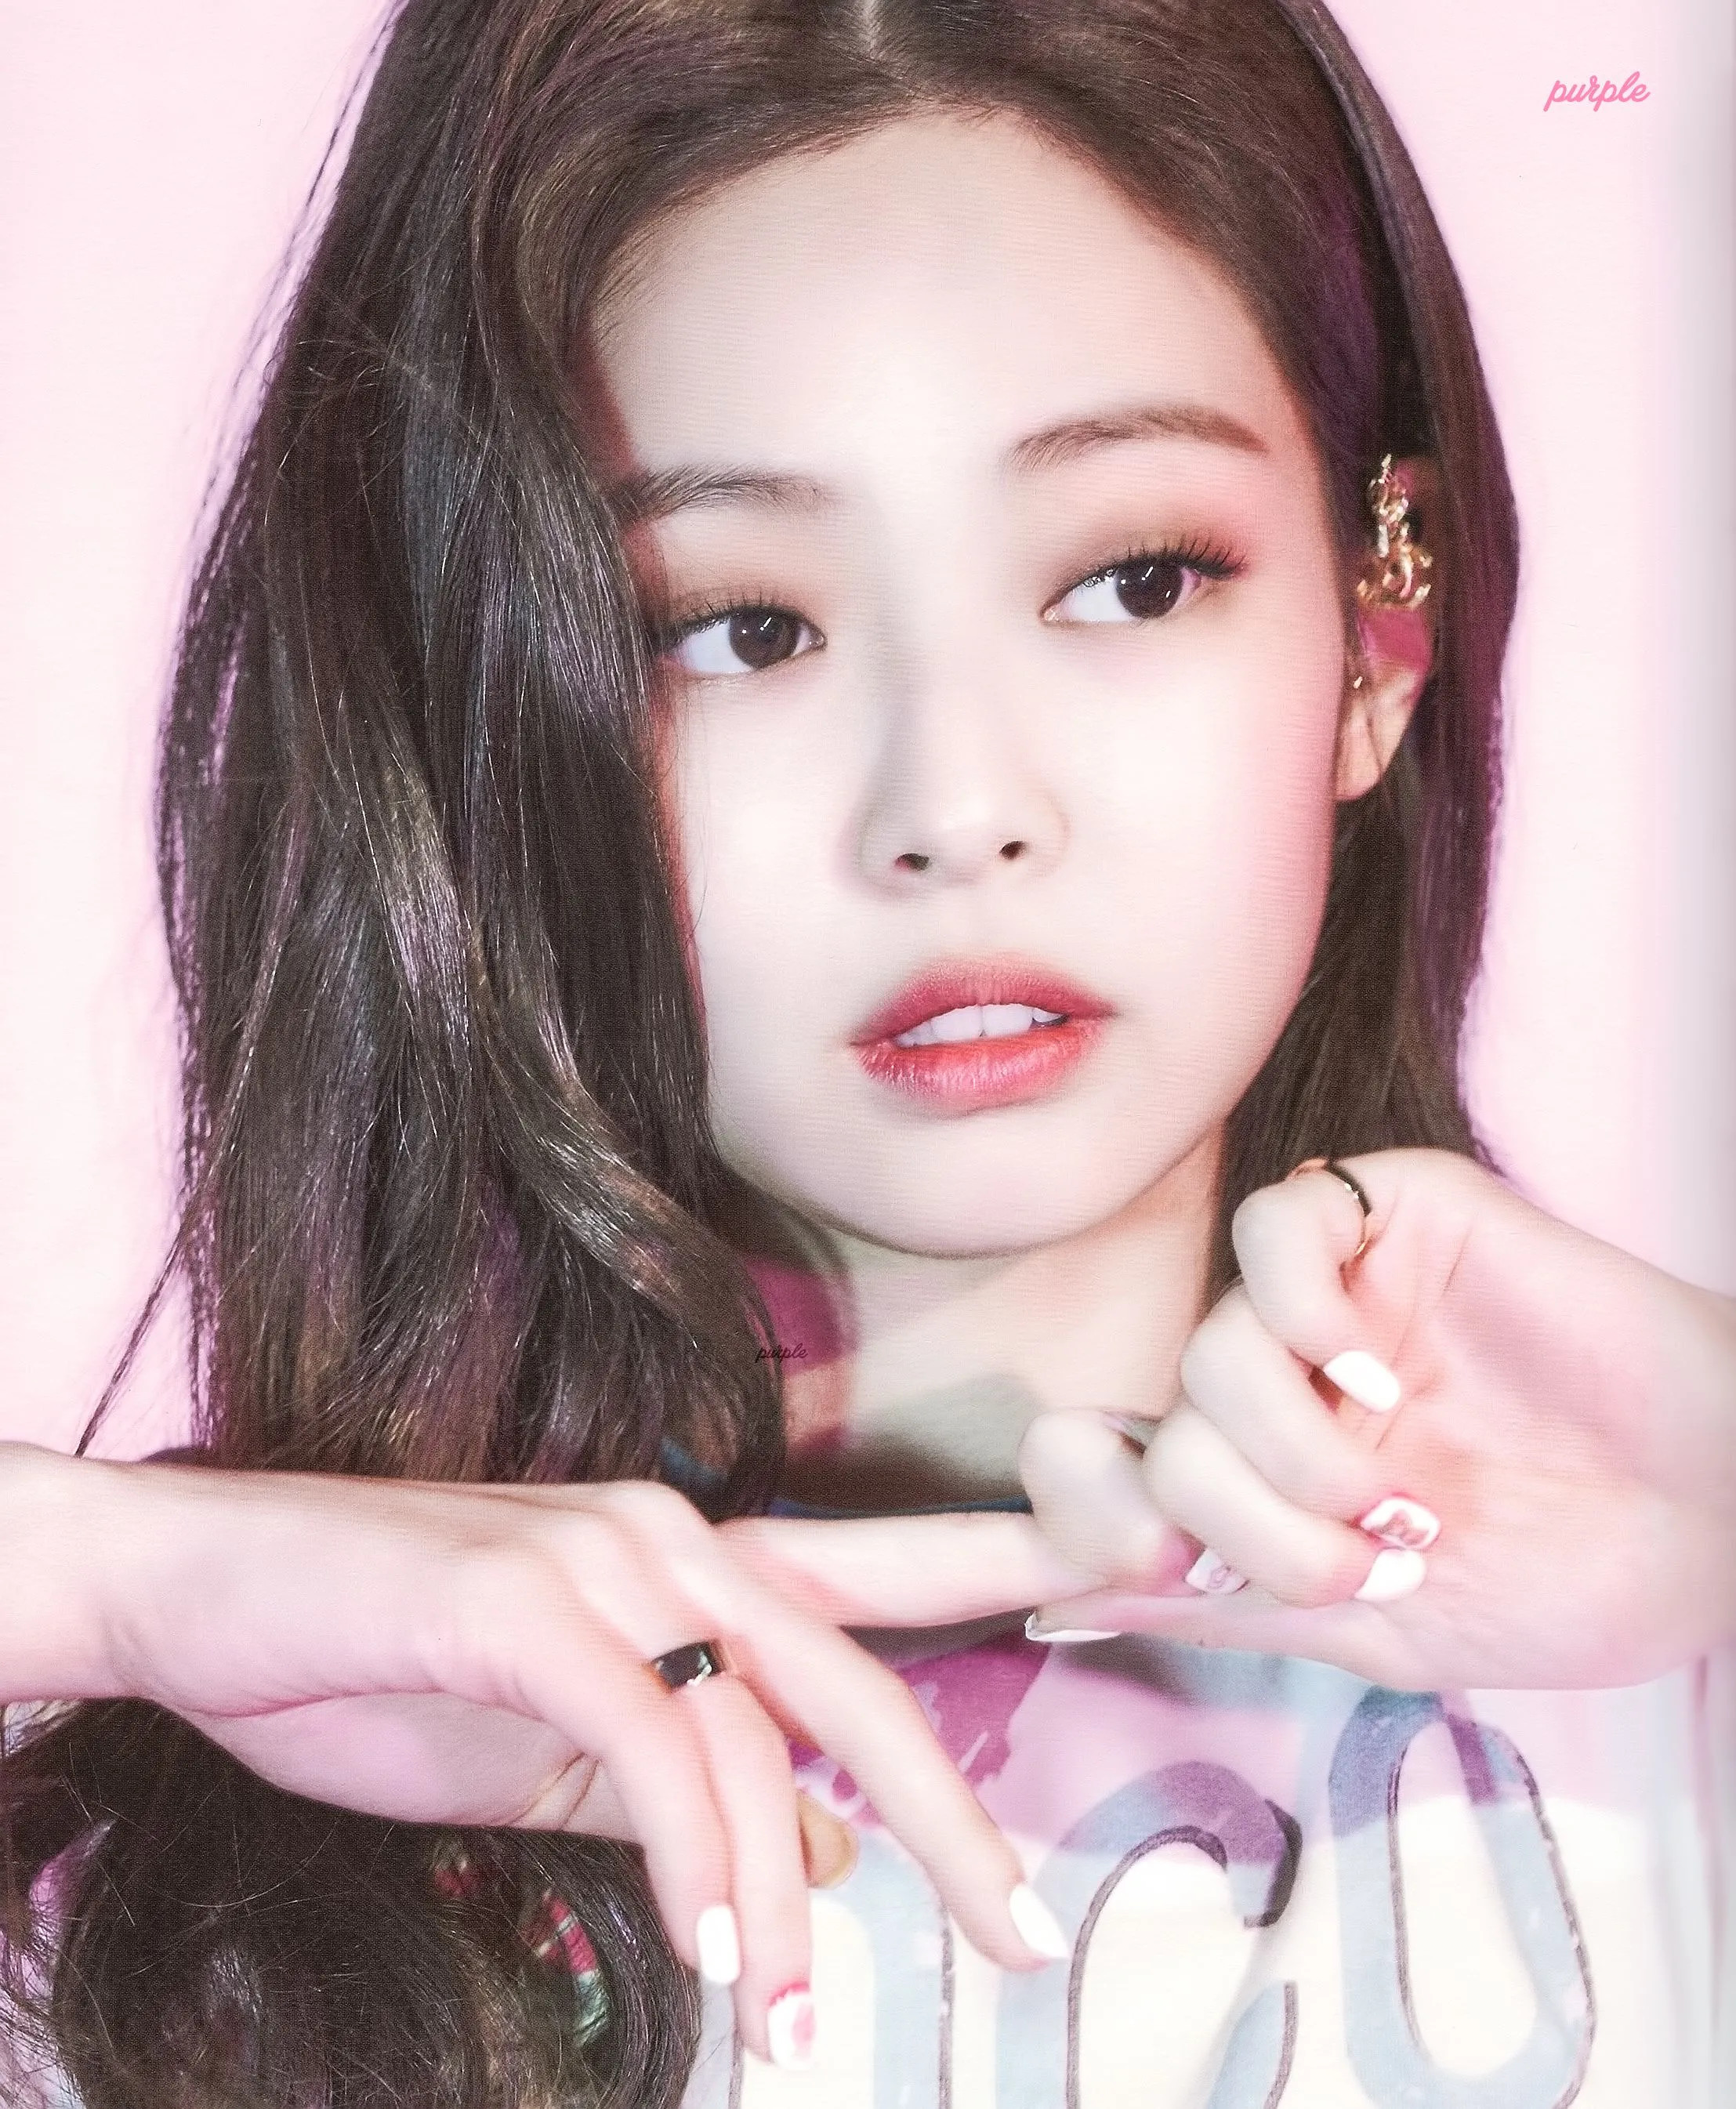 BLACKPINK Jennie Photobook Limited Edition 2019 [SCAN] | Kpopping